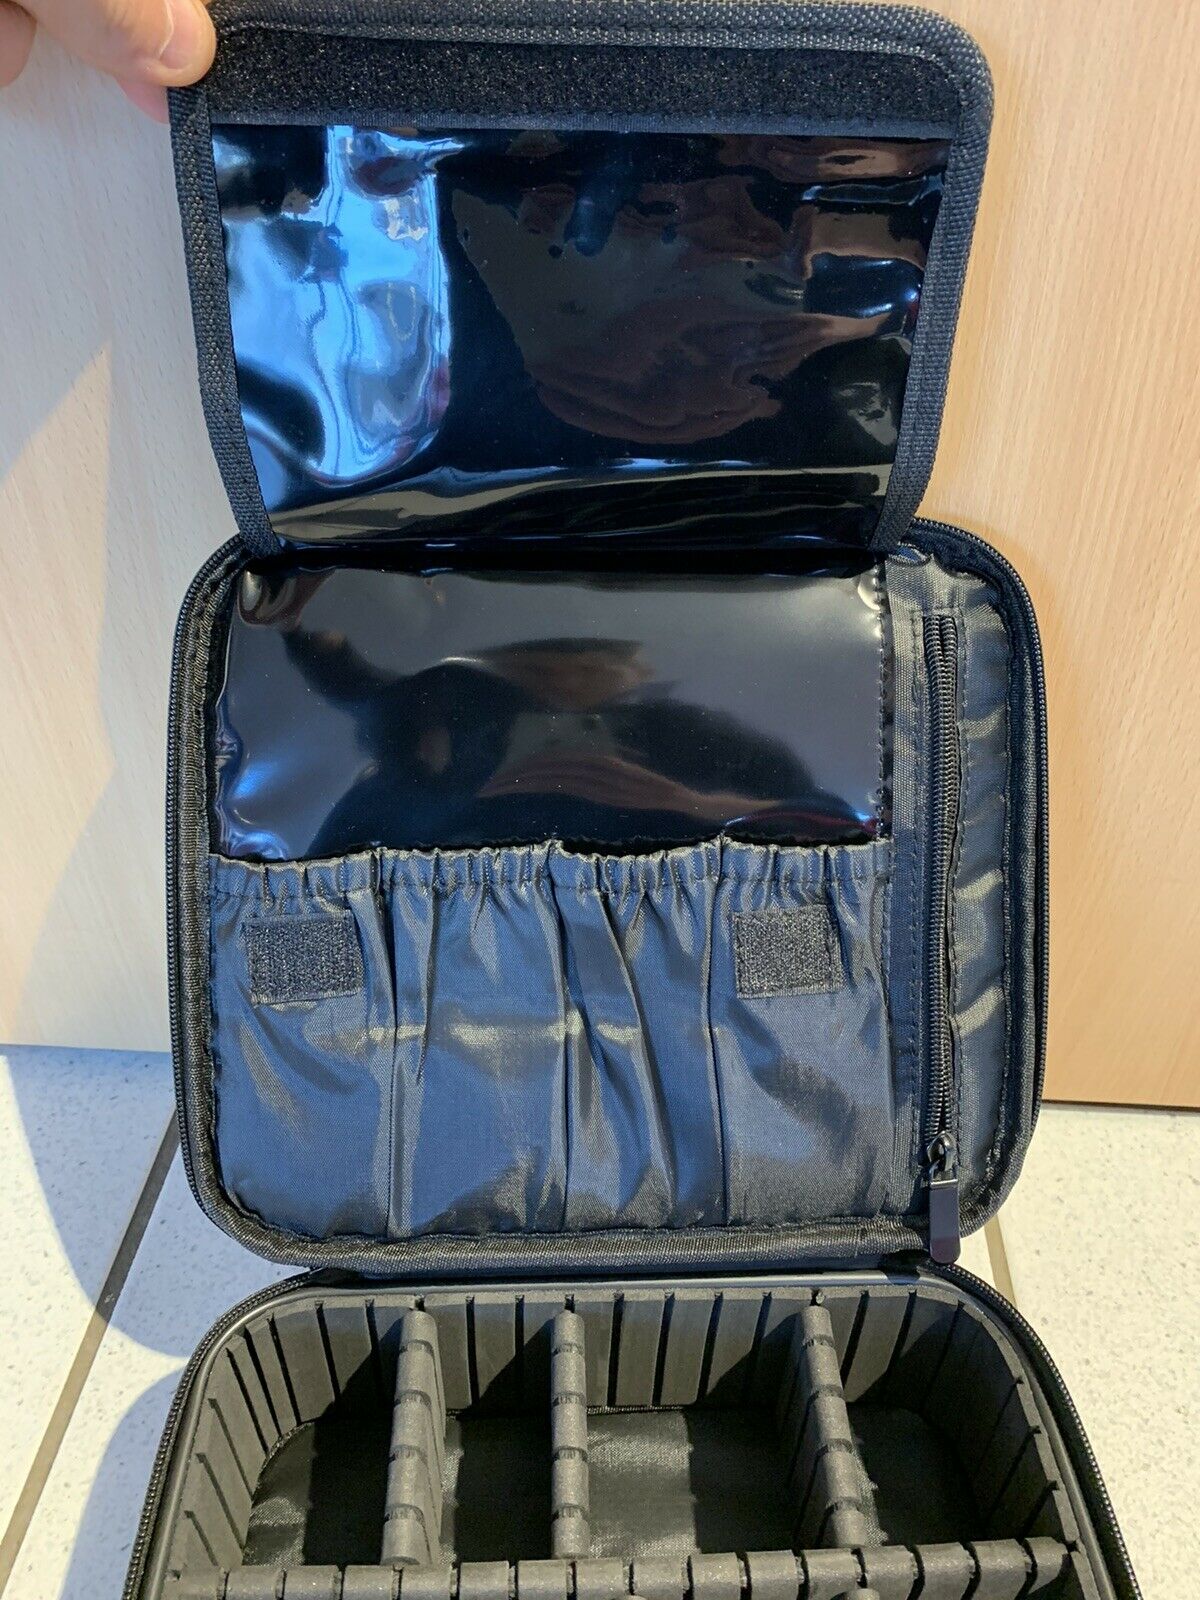 NEW Small 10" 26cm BLACK Camera Lens Carry Case Organizer Moveable Dividers